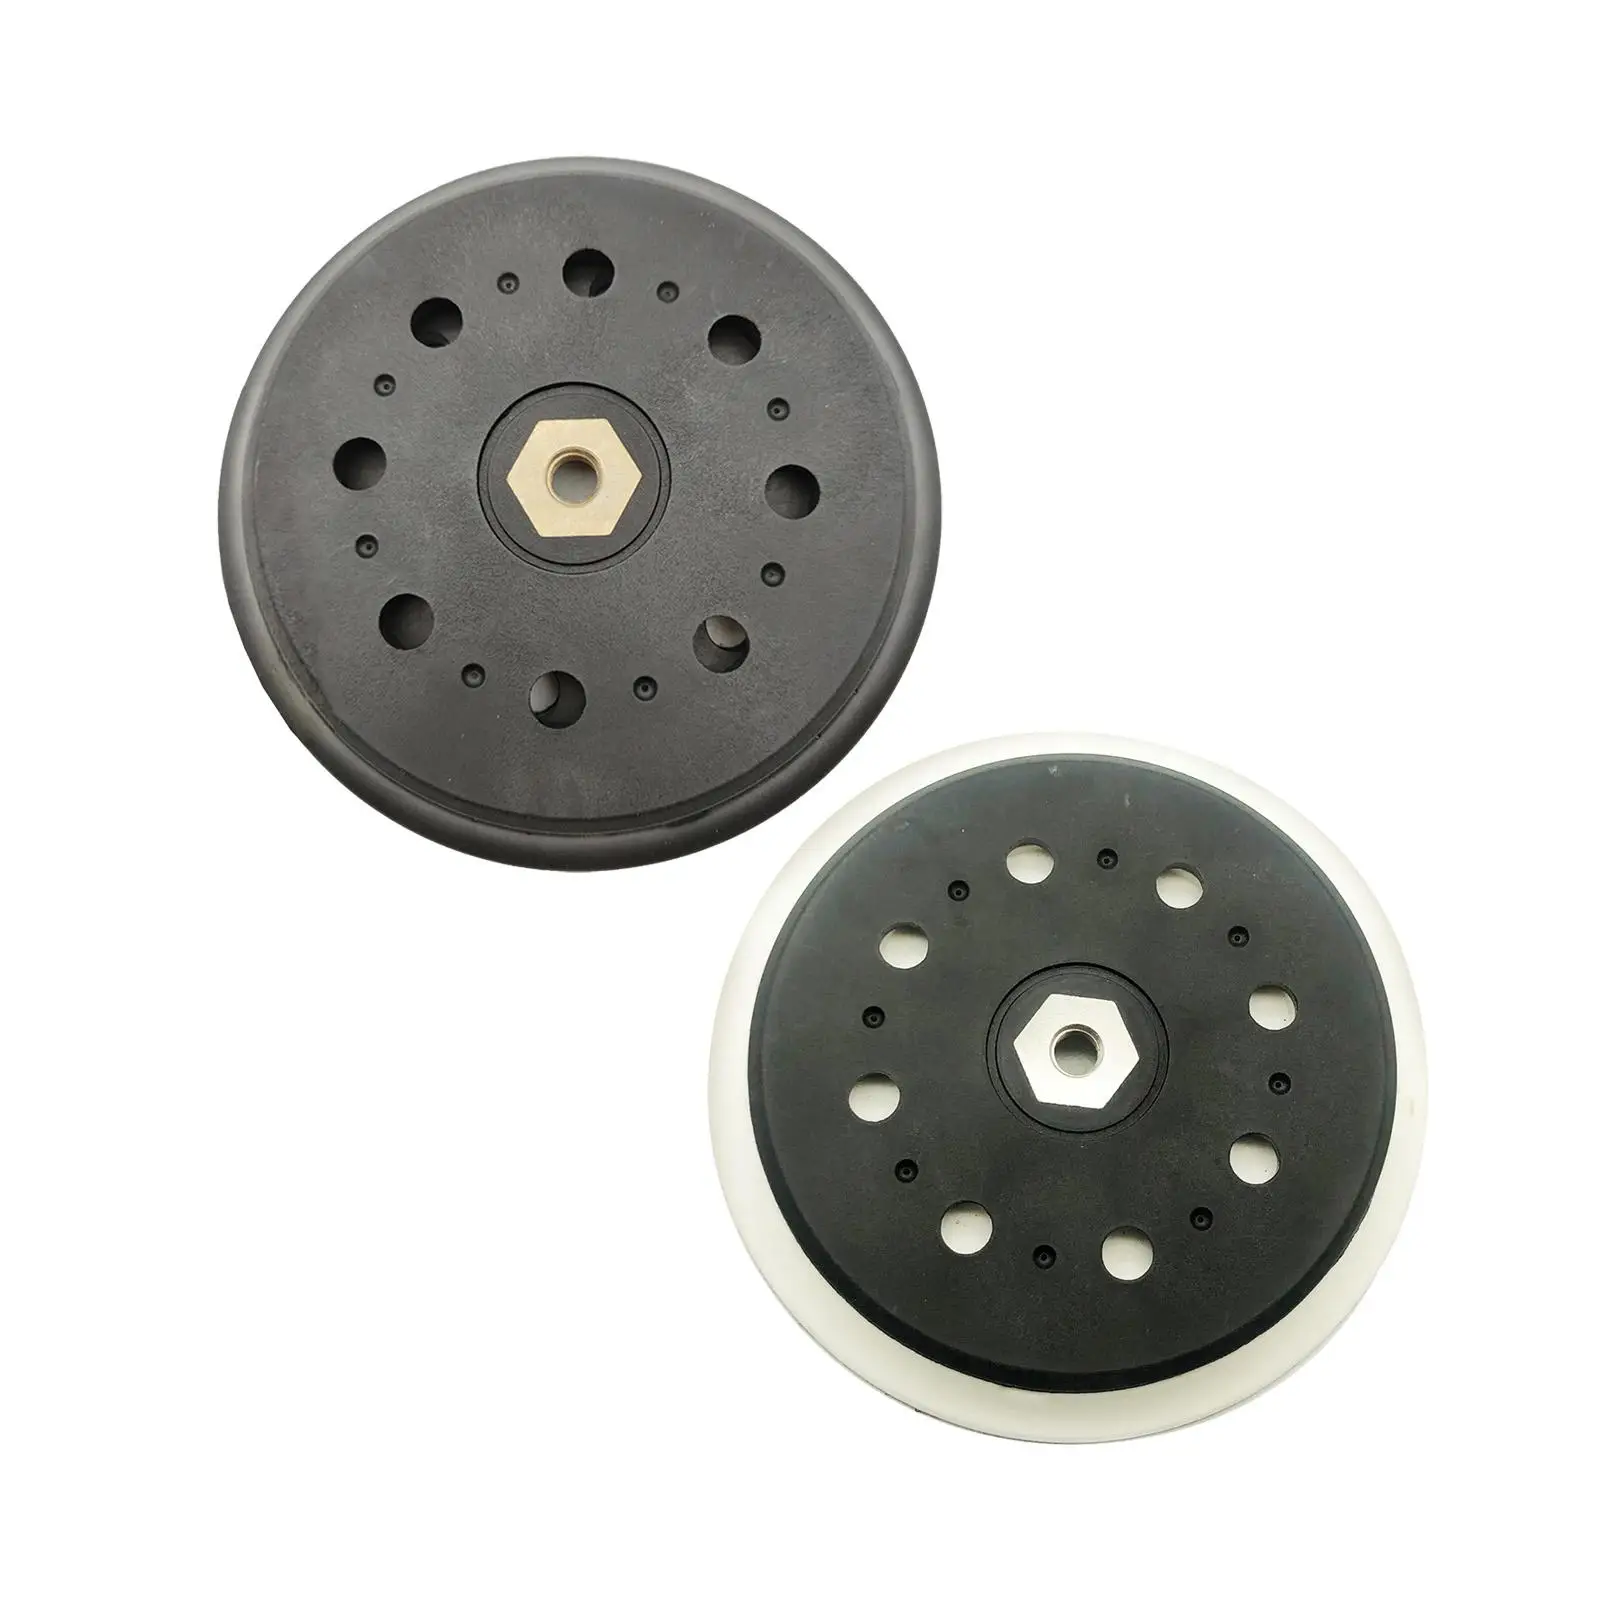 

15 Hole Sander Sanding Disc 6 Inches Backing Grinding Polishing Pad Disc Durable Sander Polisher Tool for Polisher Woodworking